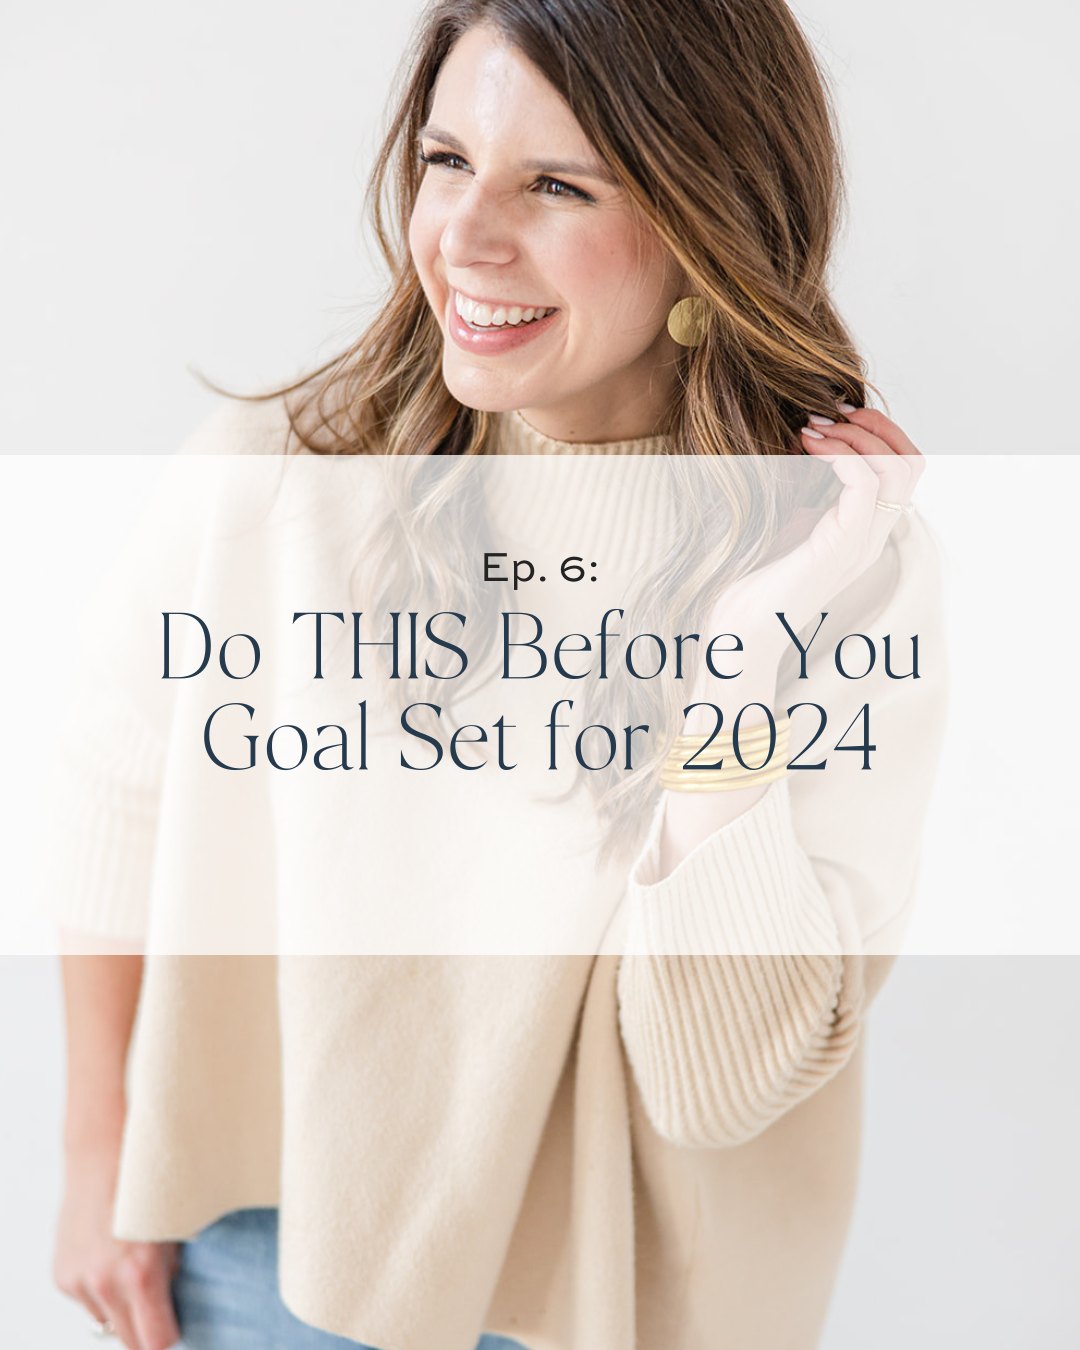 Do THIS Before You Goal Set for 2024